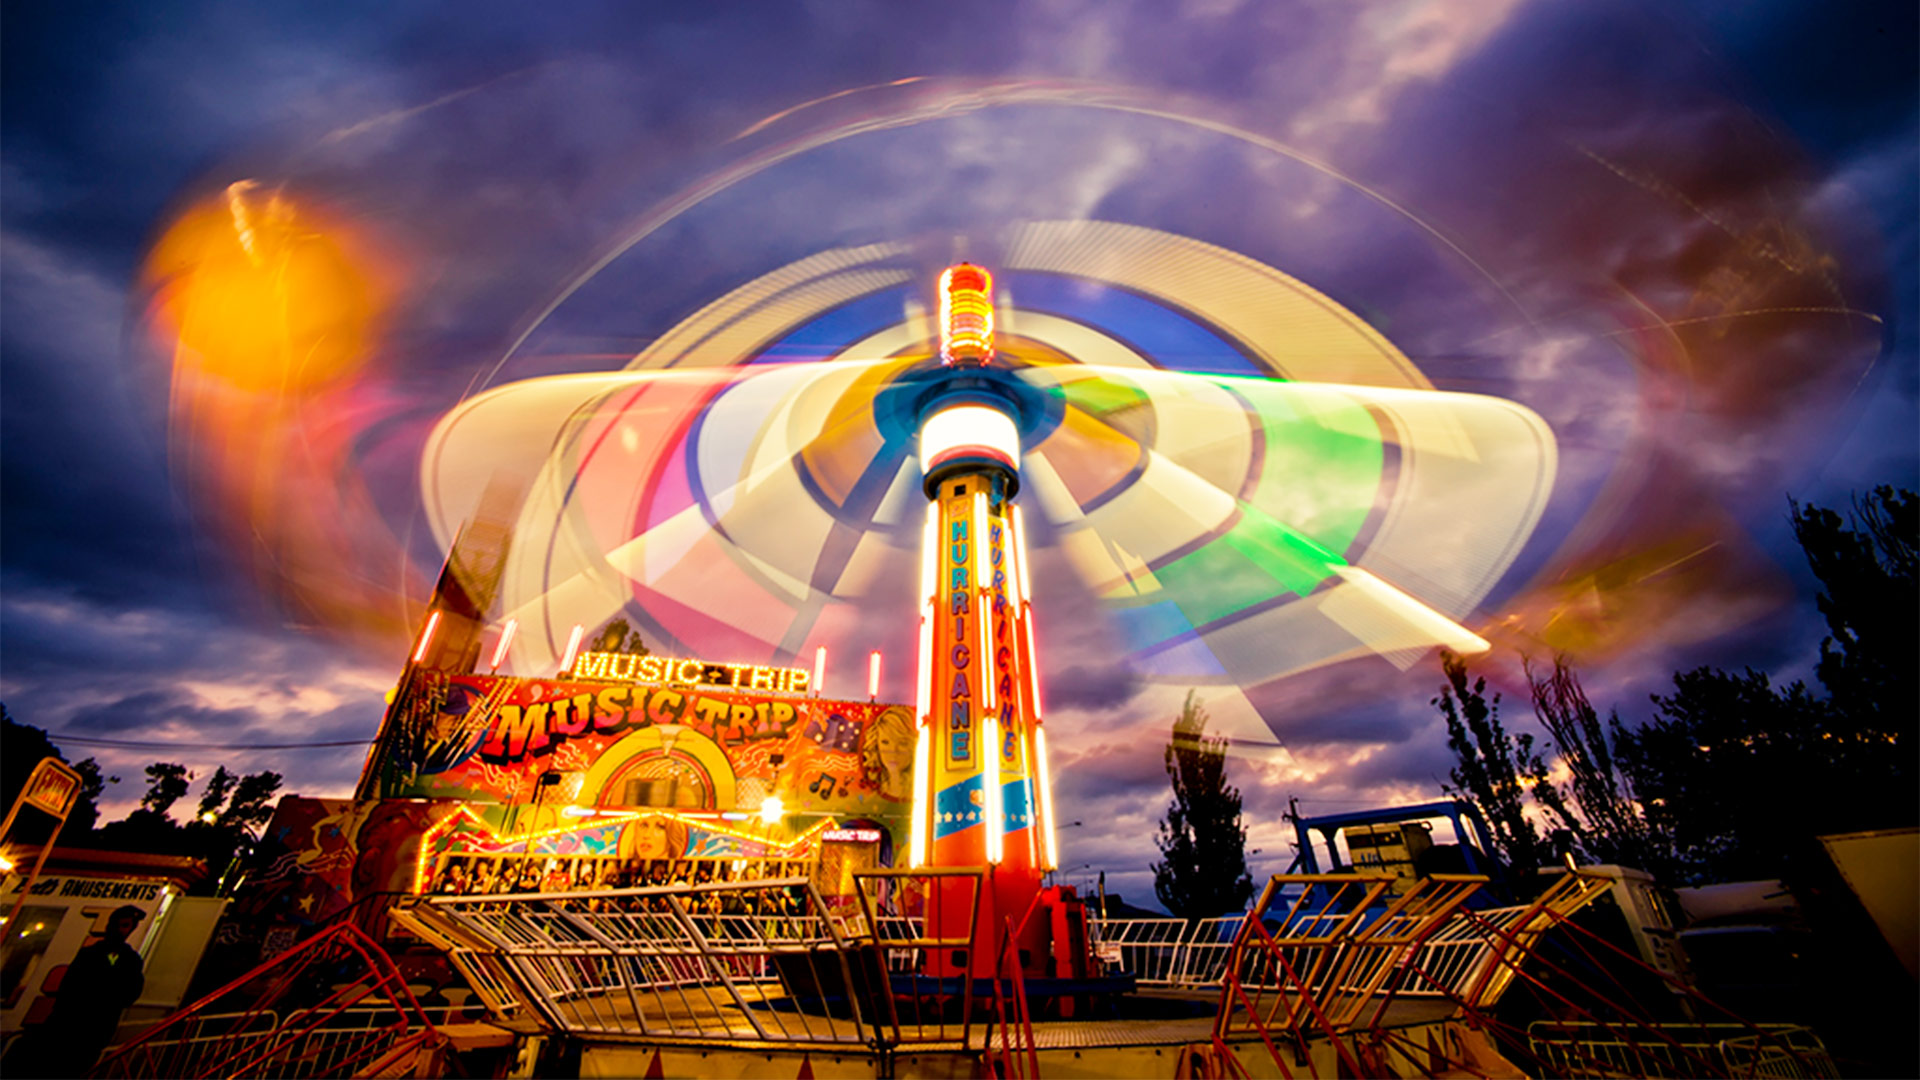 Night image of a bright ride in Sideshow alley called 'Music Trip' 